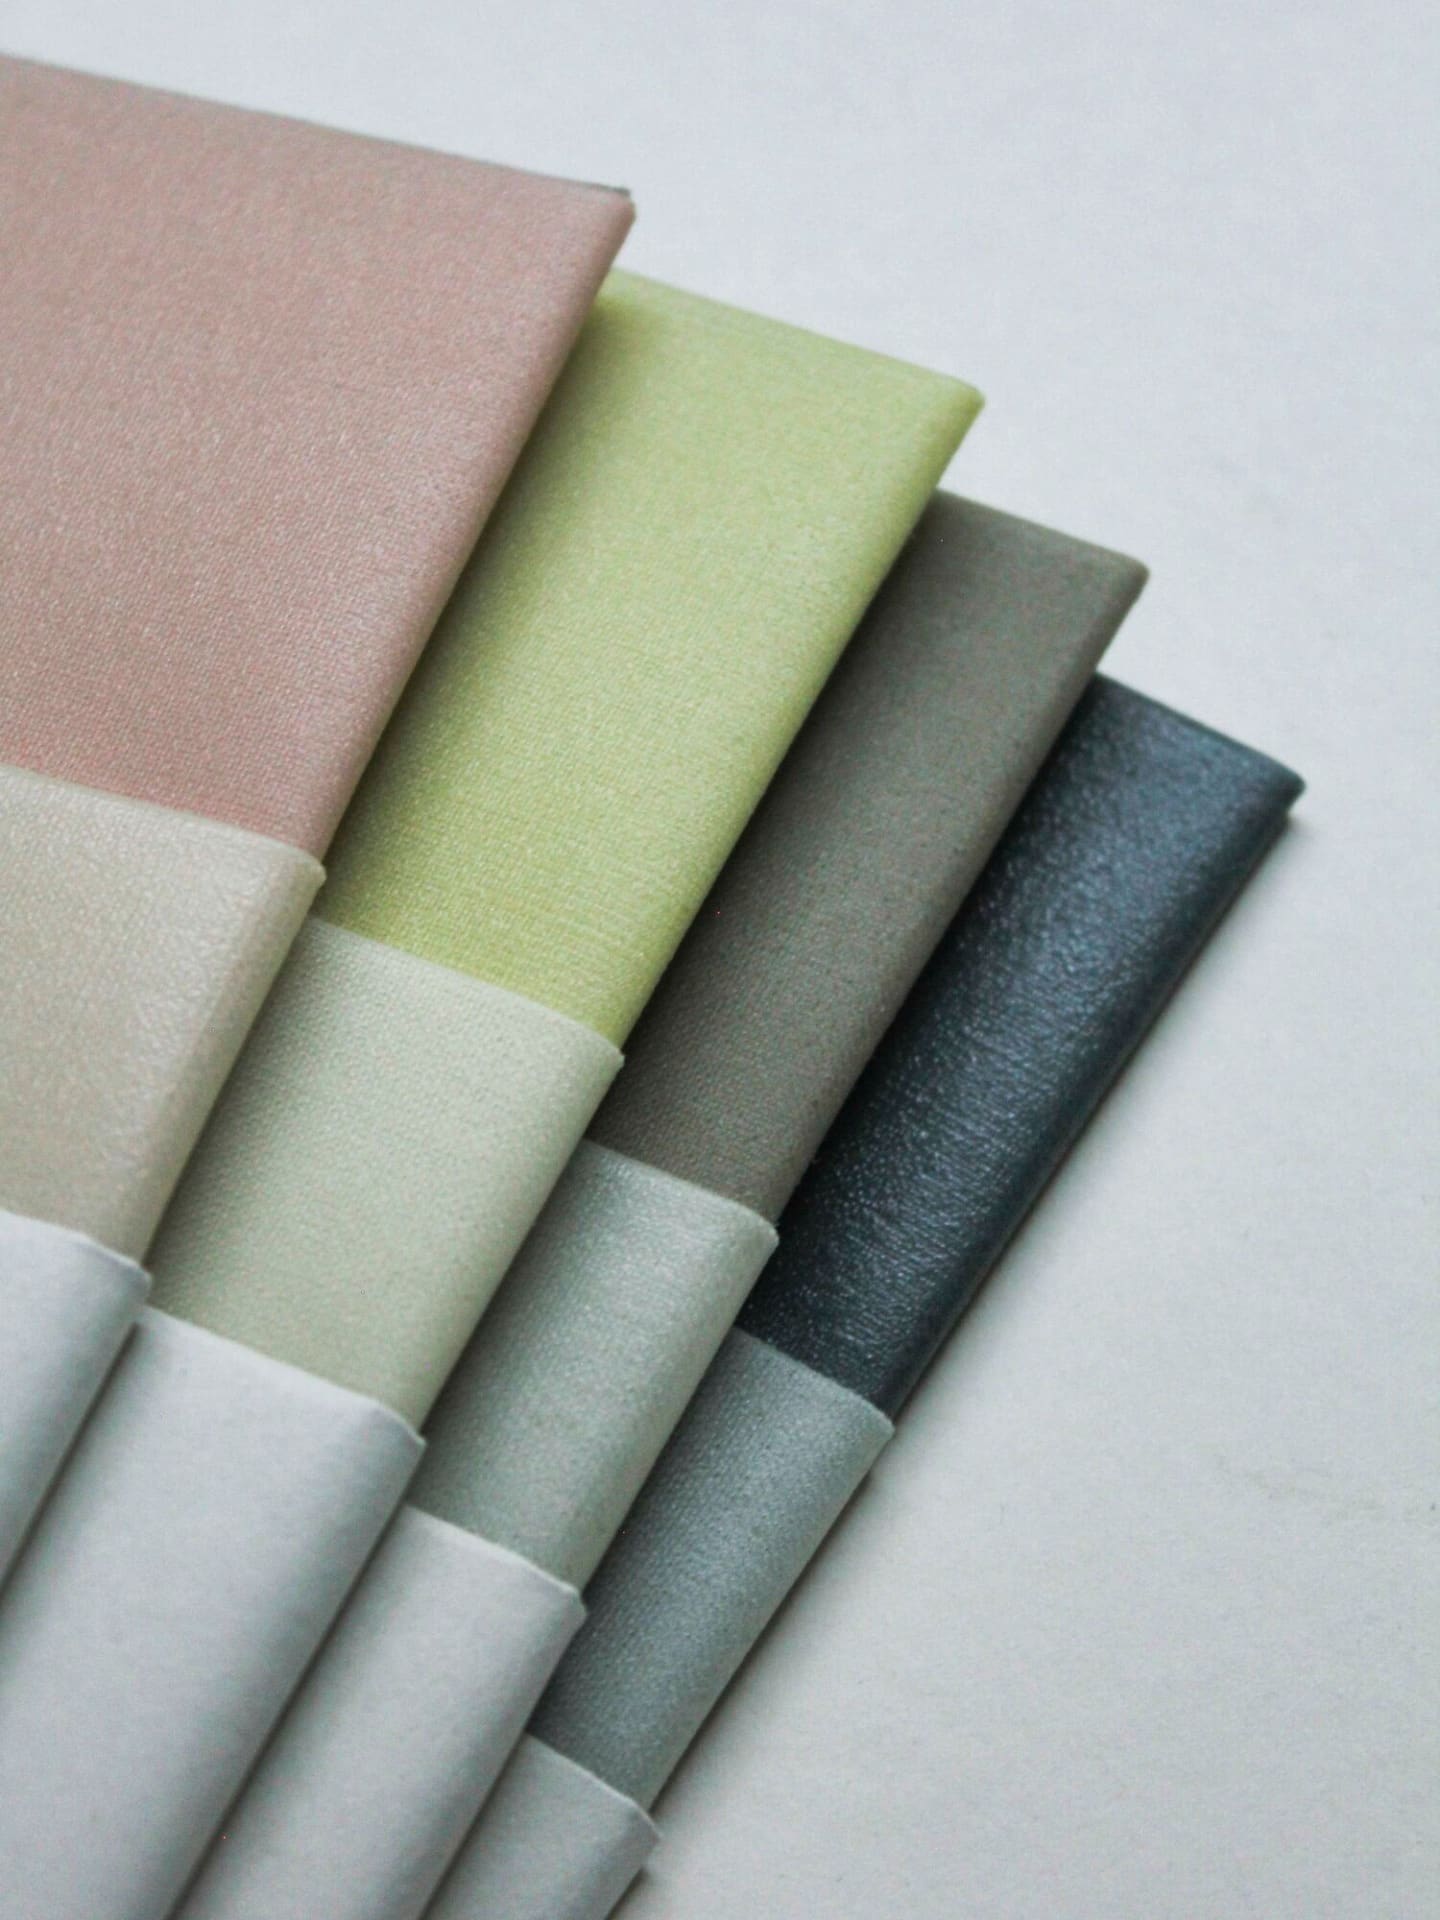 A selection of Ivy ⋄ Madder ⋄ Indigo Waxed Linen Food Wraps (Set of 3) in a gradient of colors from pink to dark gray, displayed in a fan arrangement by Wax Atelier.